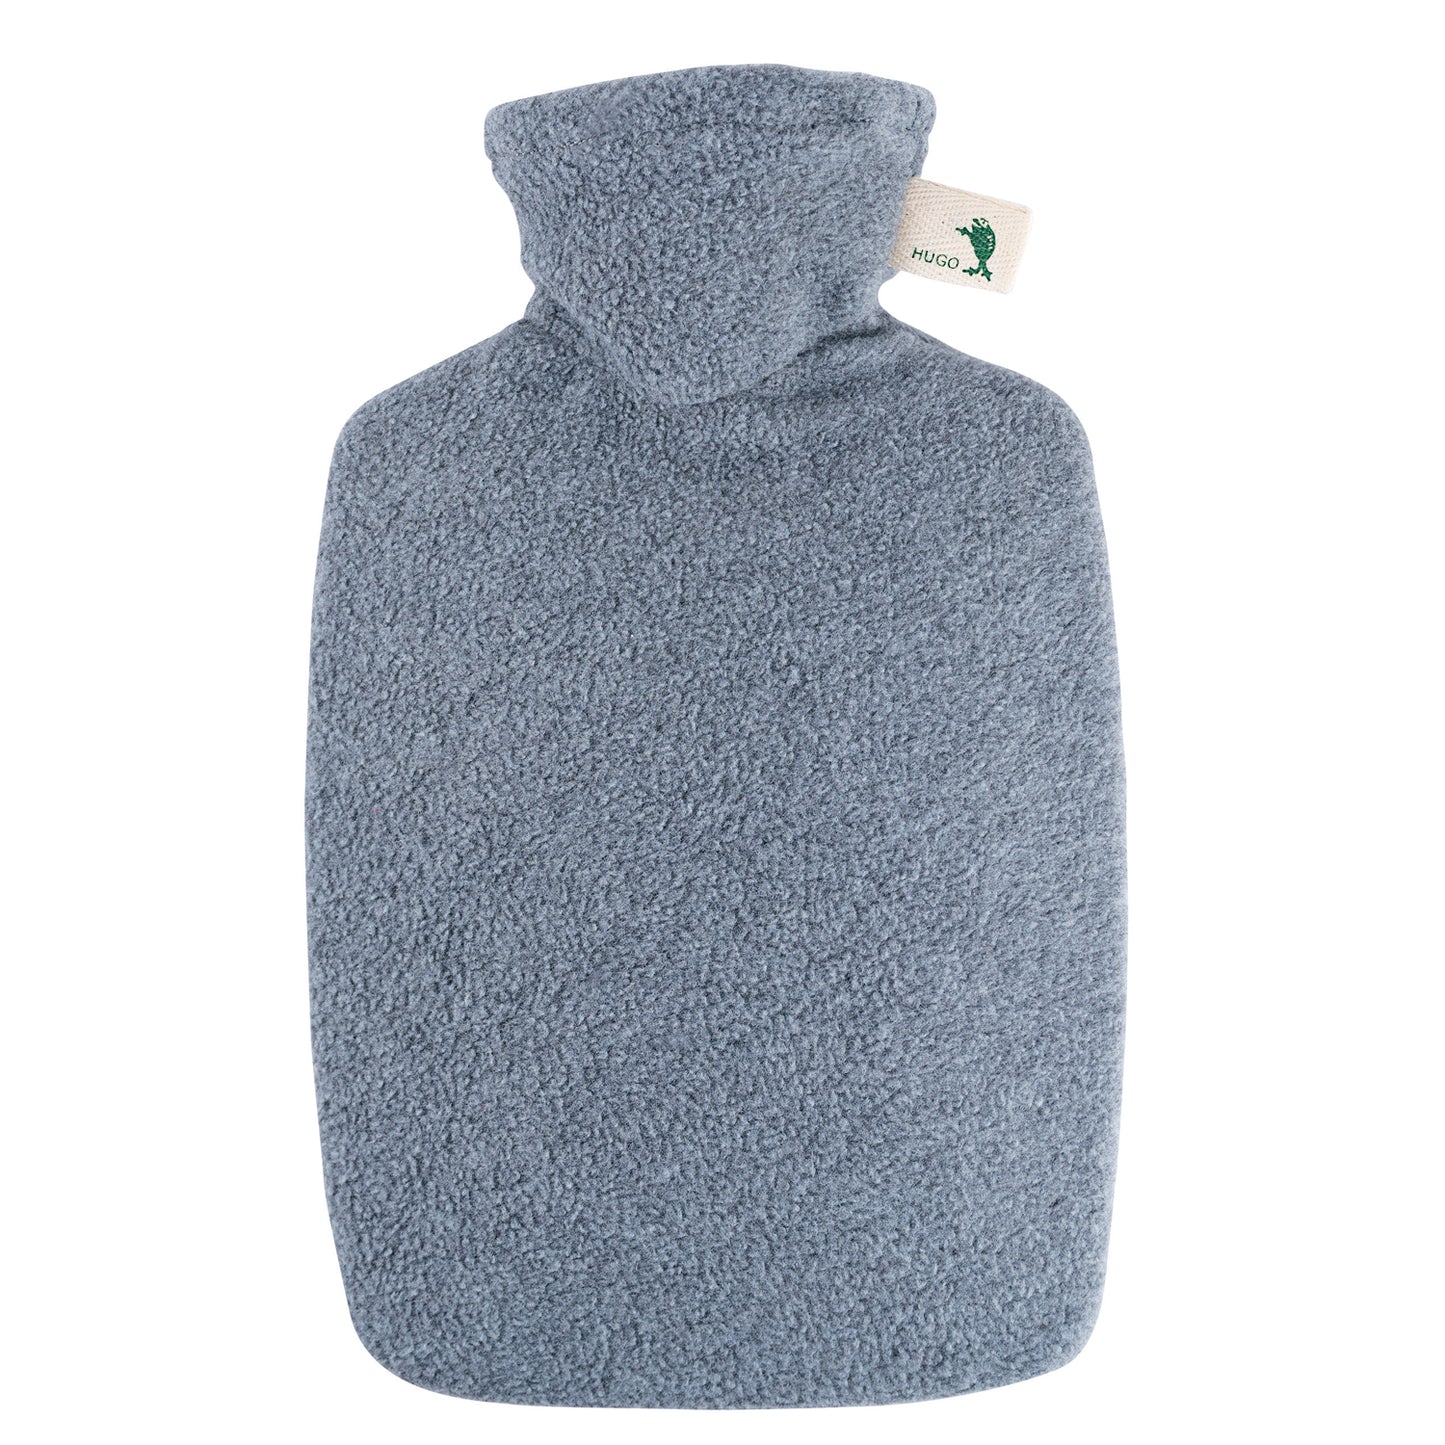 Hot-water bottle classic 1.8 litre with gray fleece cover